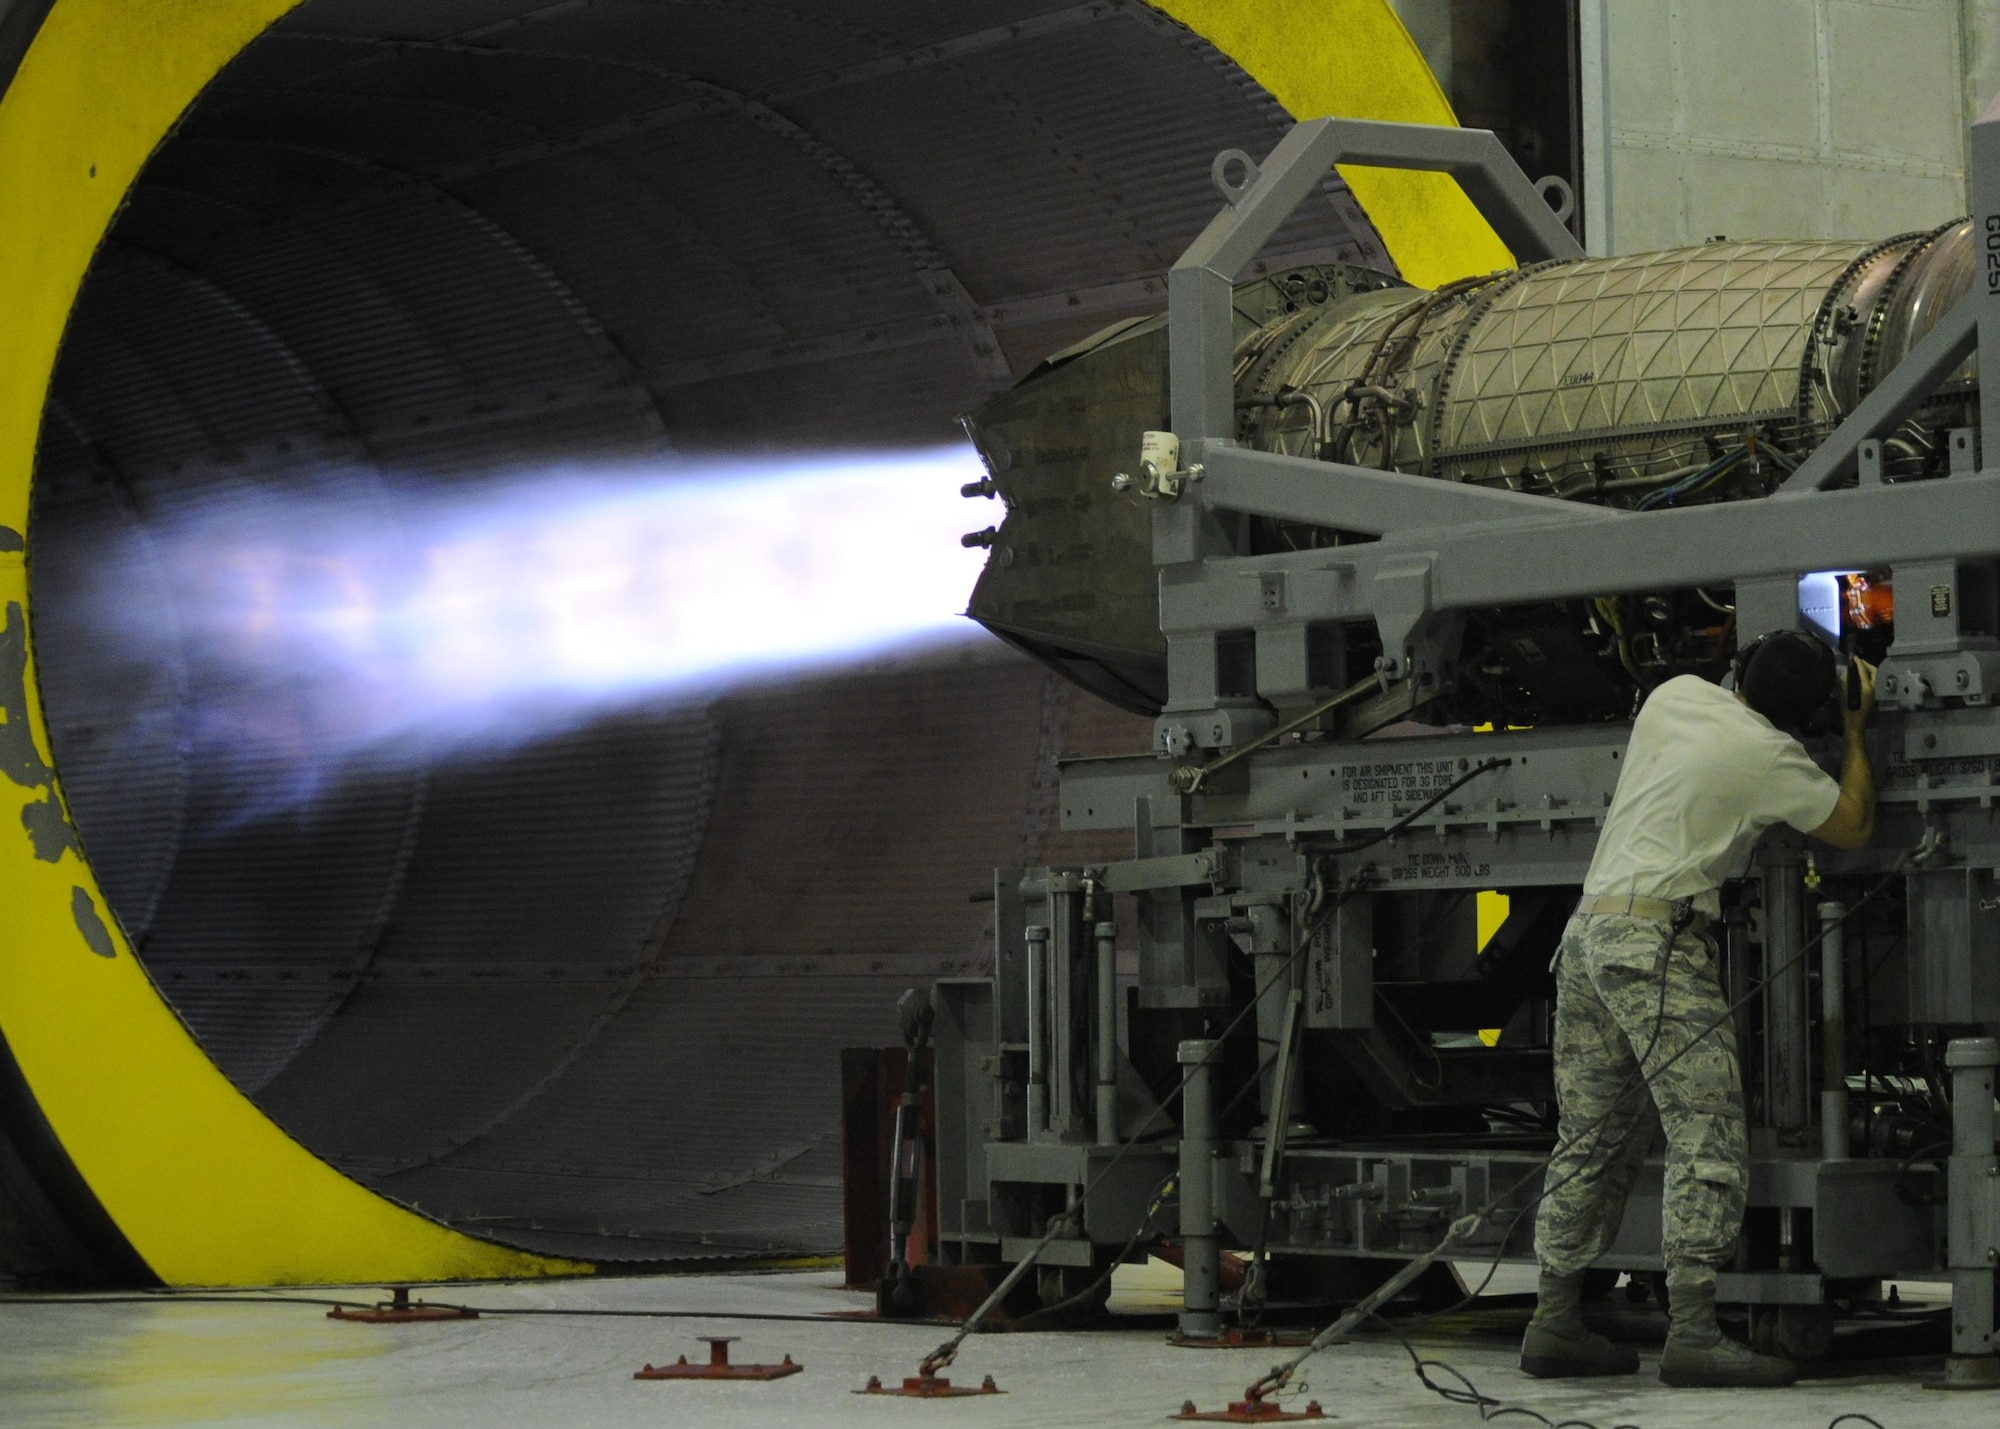 Senior Airman Matthew Garcia, 325th Maintenance Squadron aerospace propulsion journeyman looks for leaks coming from the F119-100 engine March 29, 2016, at test cell. During these tests and checks, F119-100 engines are turned on to full after burn to inspect its readiness. (U.S. Air Force photo by Senior Airman Solomon Cook/Released)